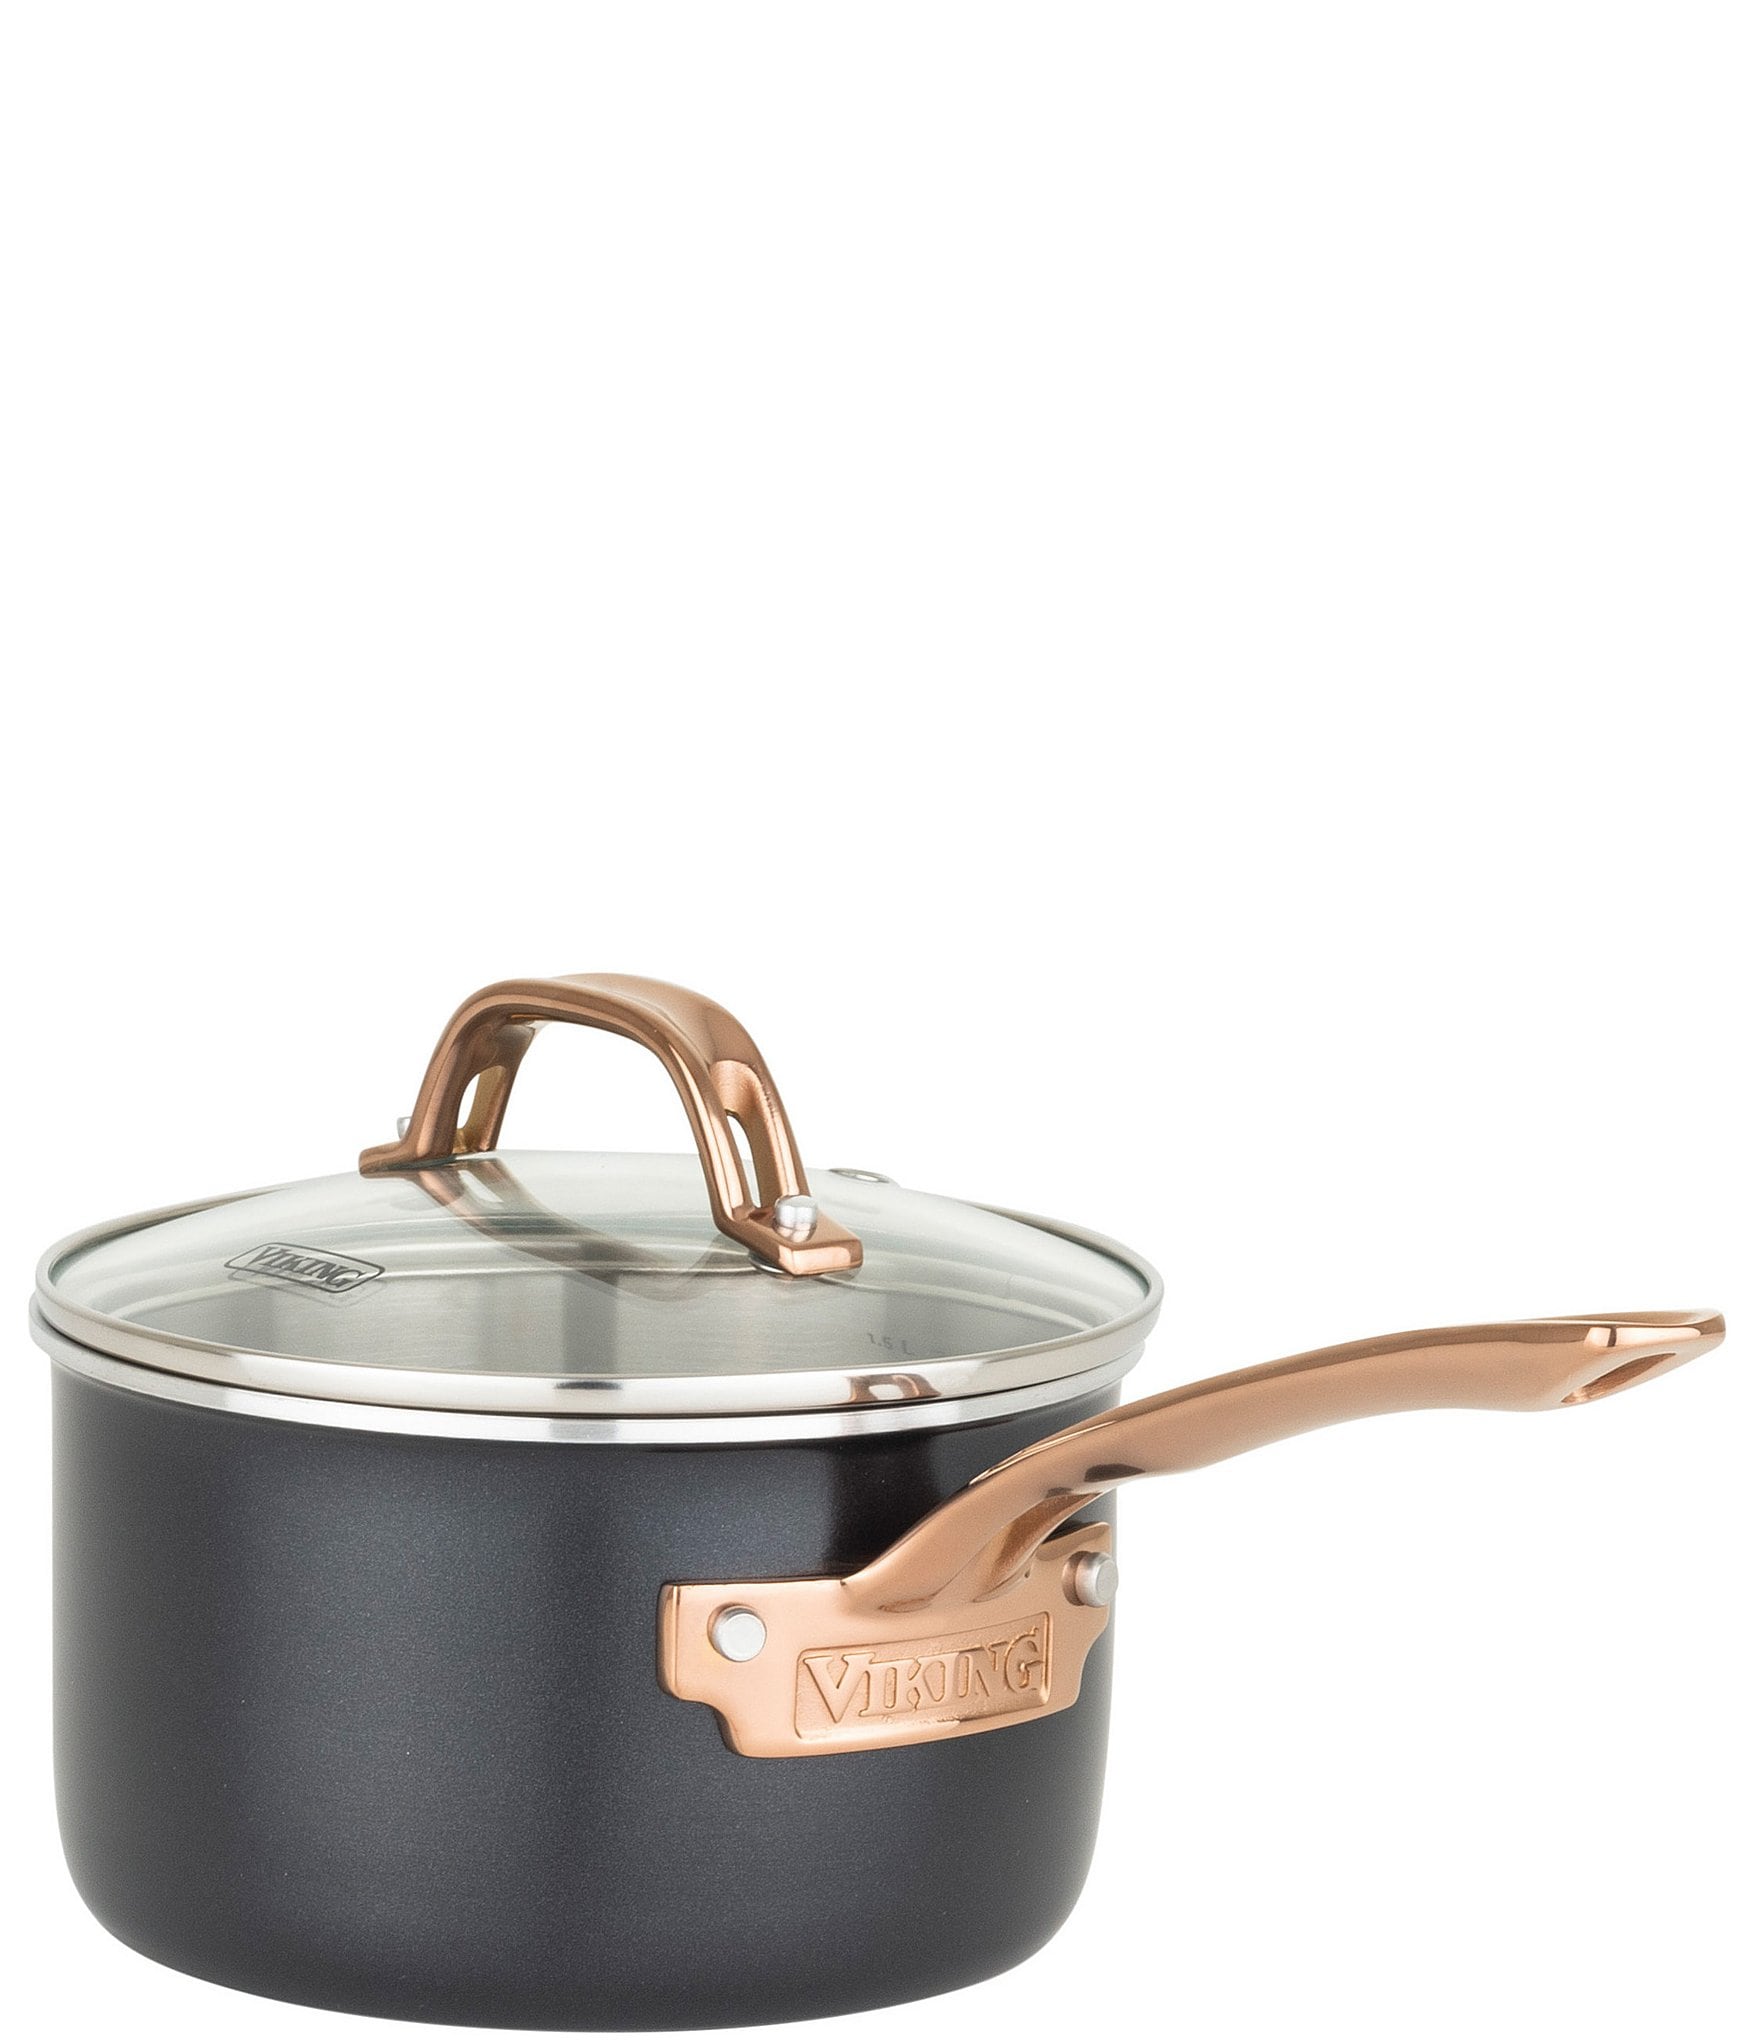 Viking 3-Ply Black and Copper 5-Quart Dutch Oven with Glass Lid